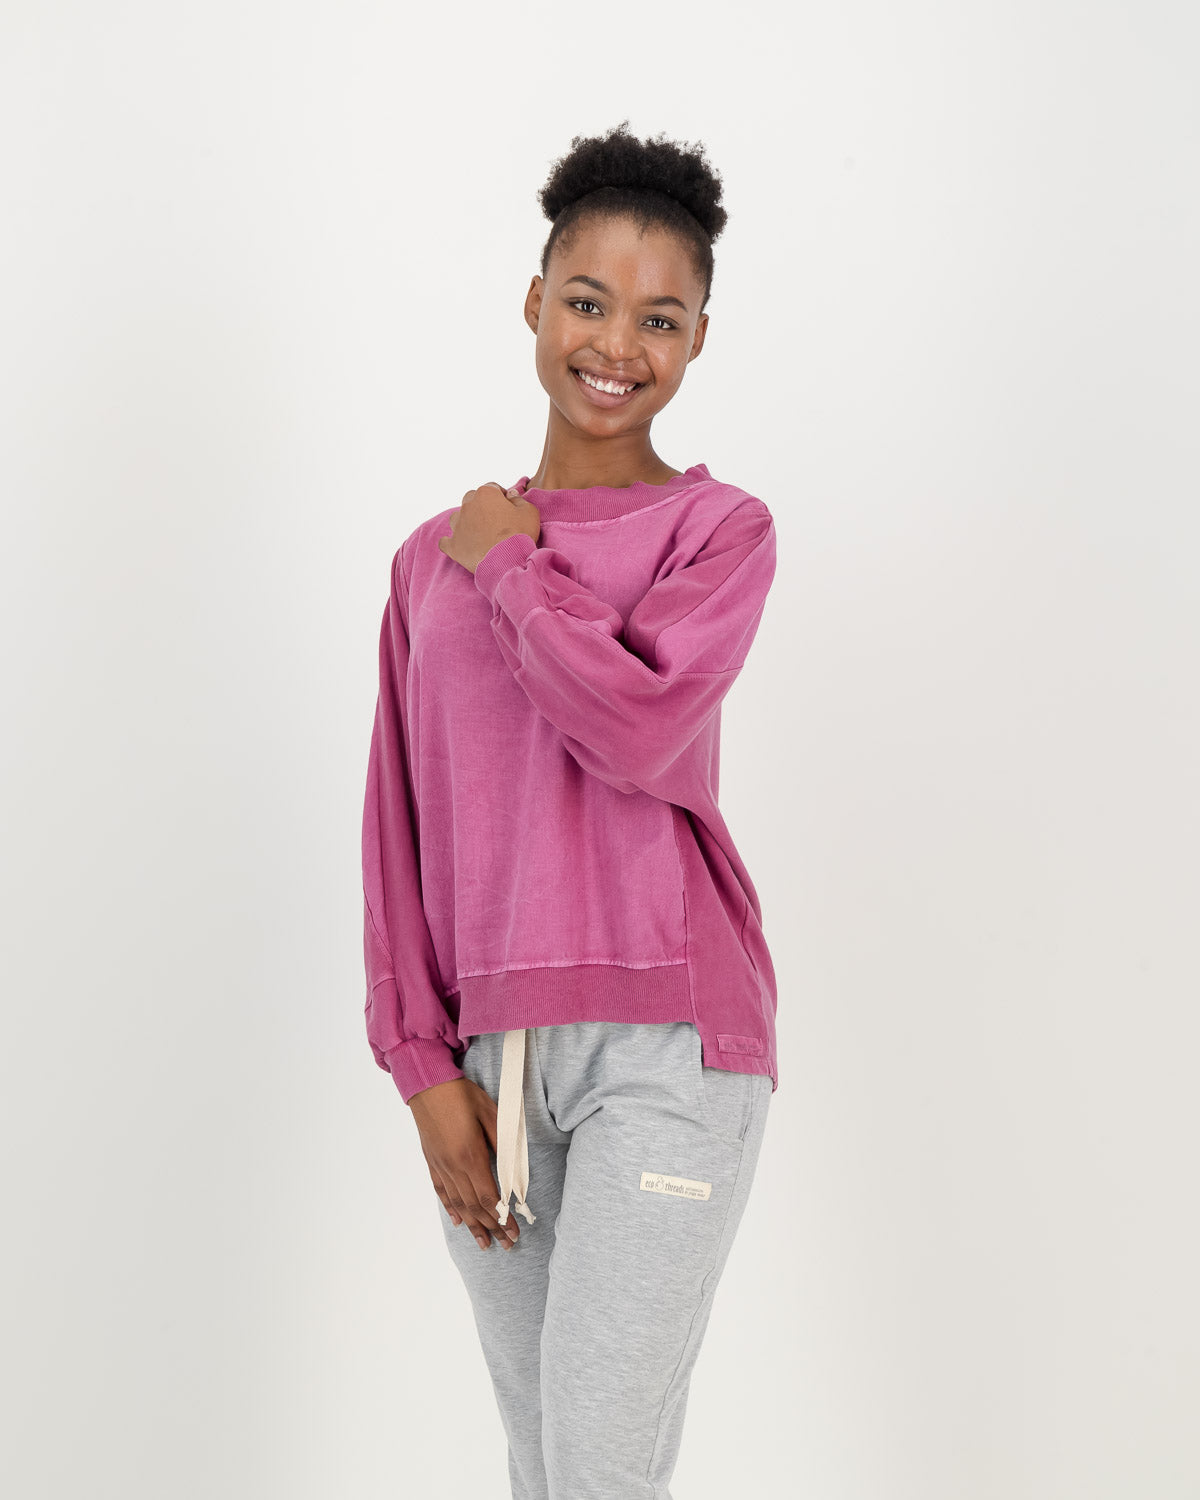 Batwing Overdyed Magenta Sweatshirt, loose fitting with light grey comfy pants